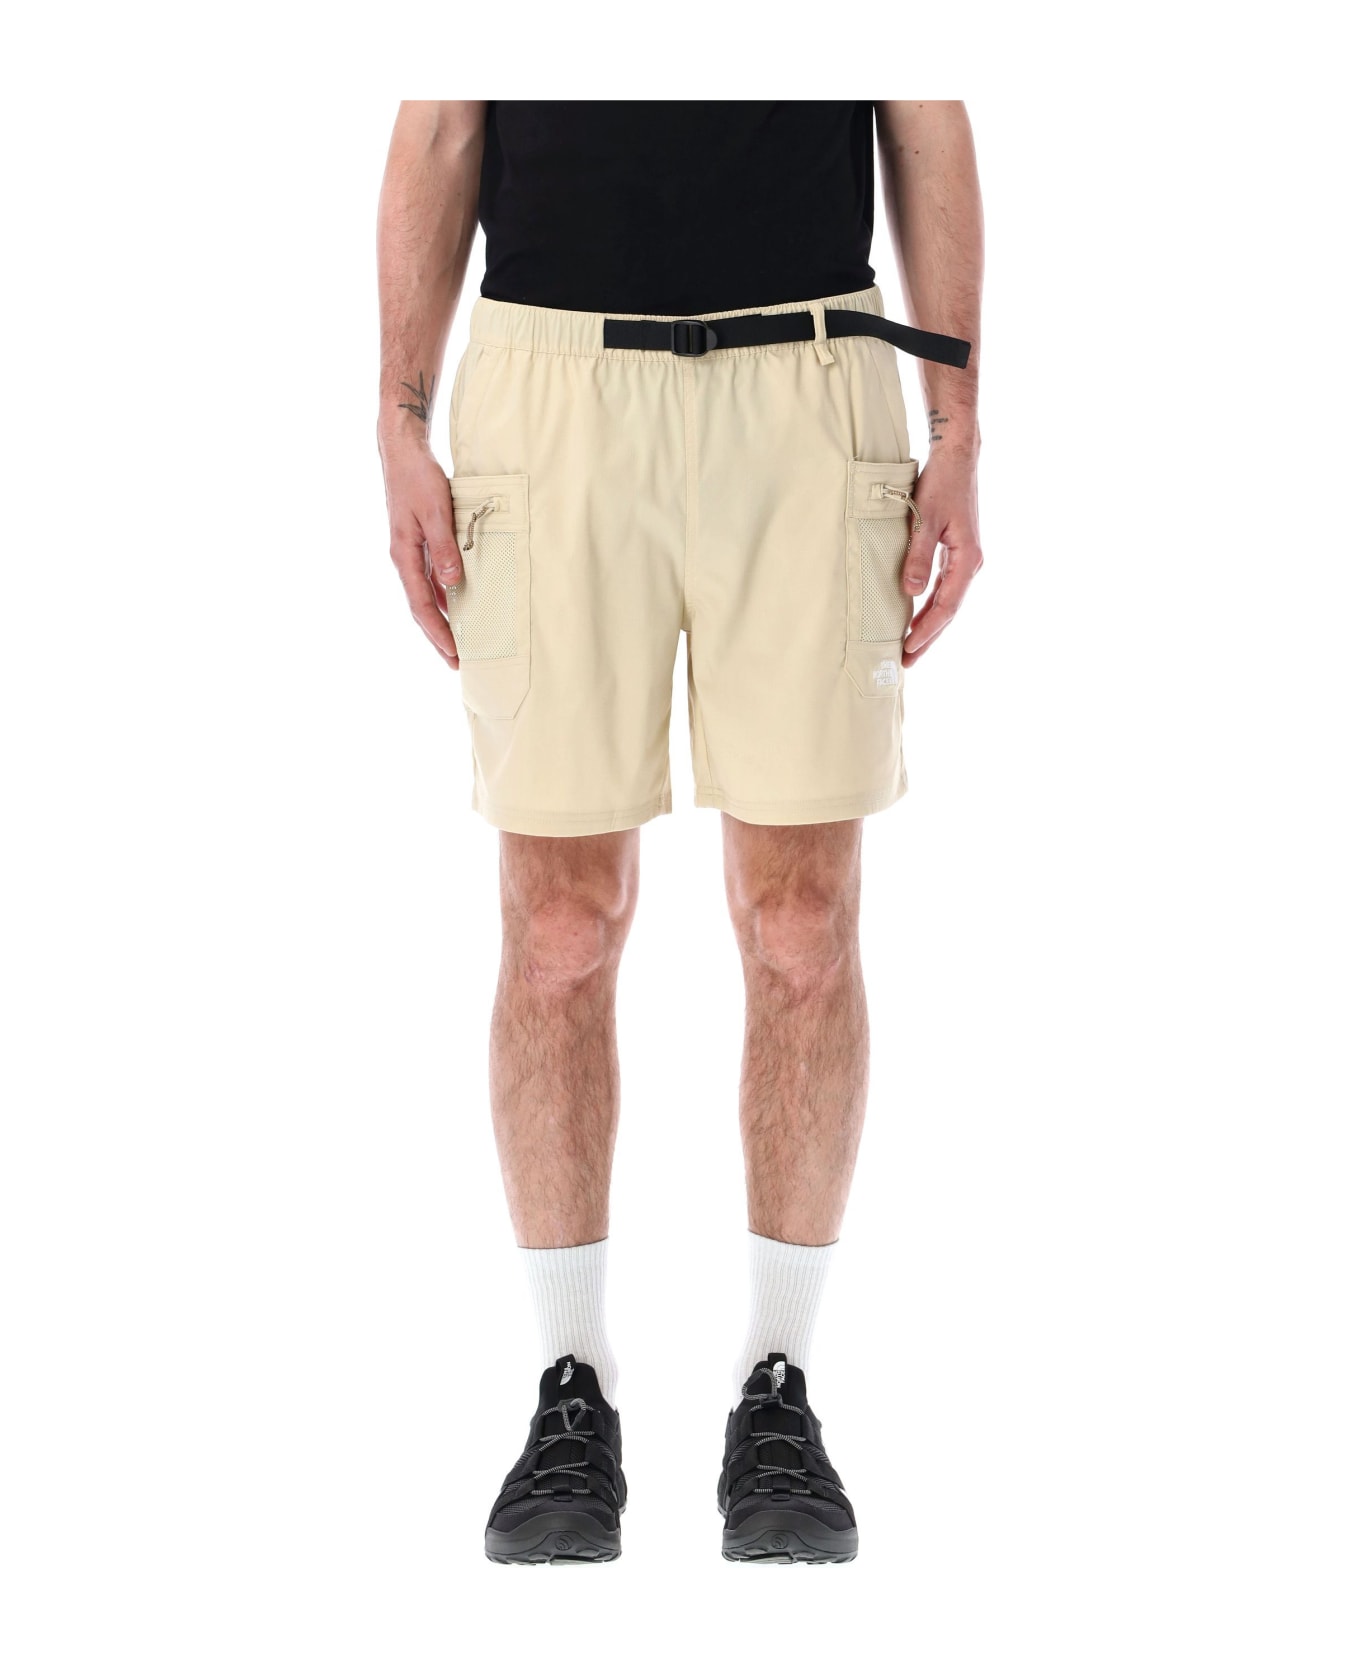 The North Face Ripstop Belted Cargo Short - GRAVEL ショートパンツ